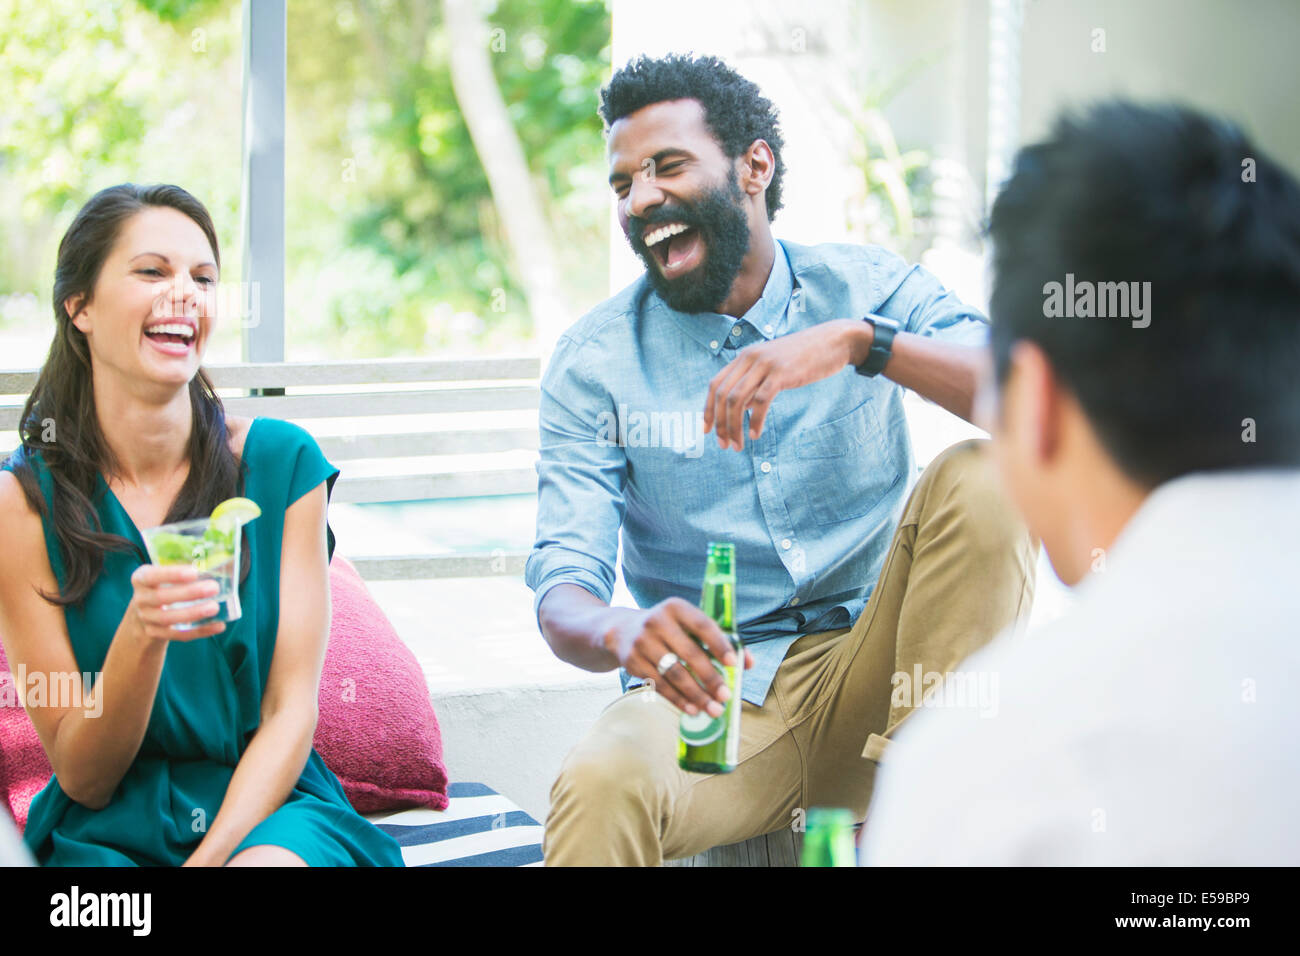 Friends laughing together at party Stock Photo